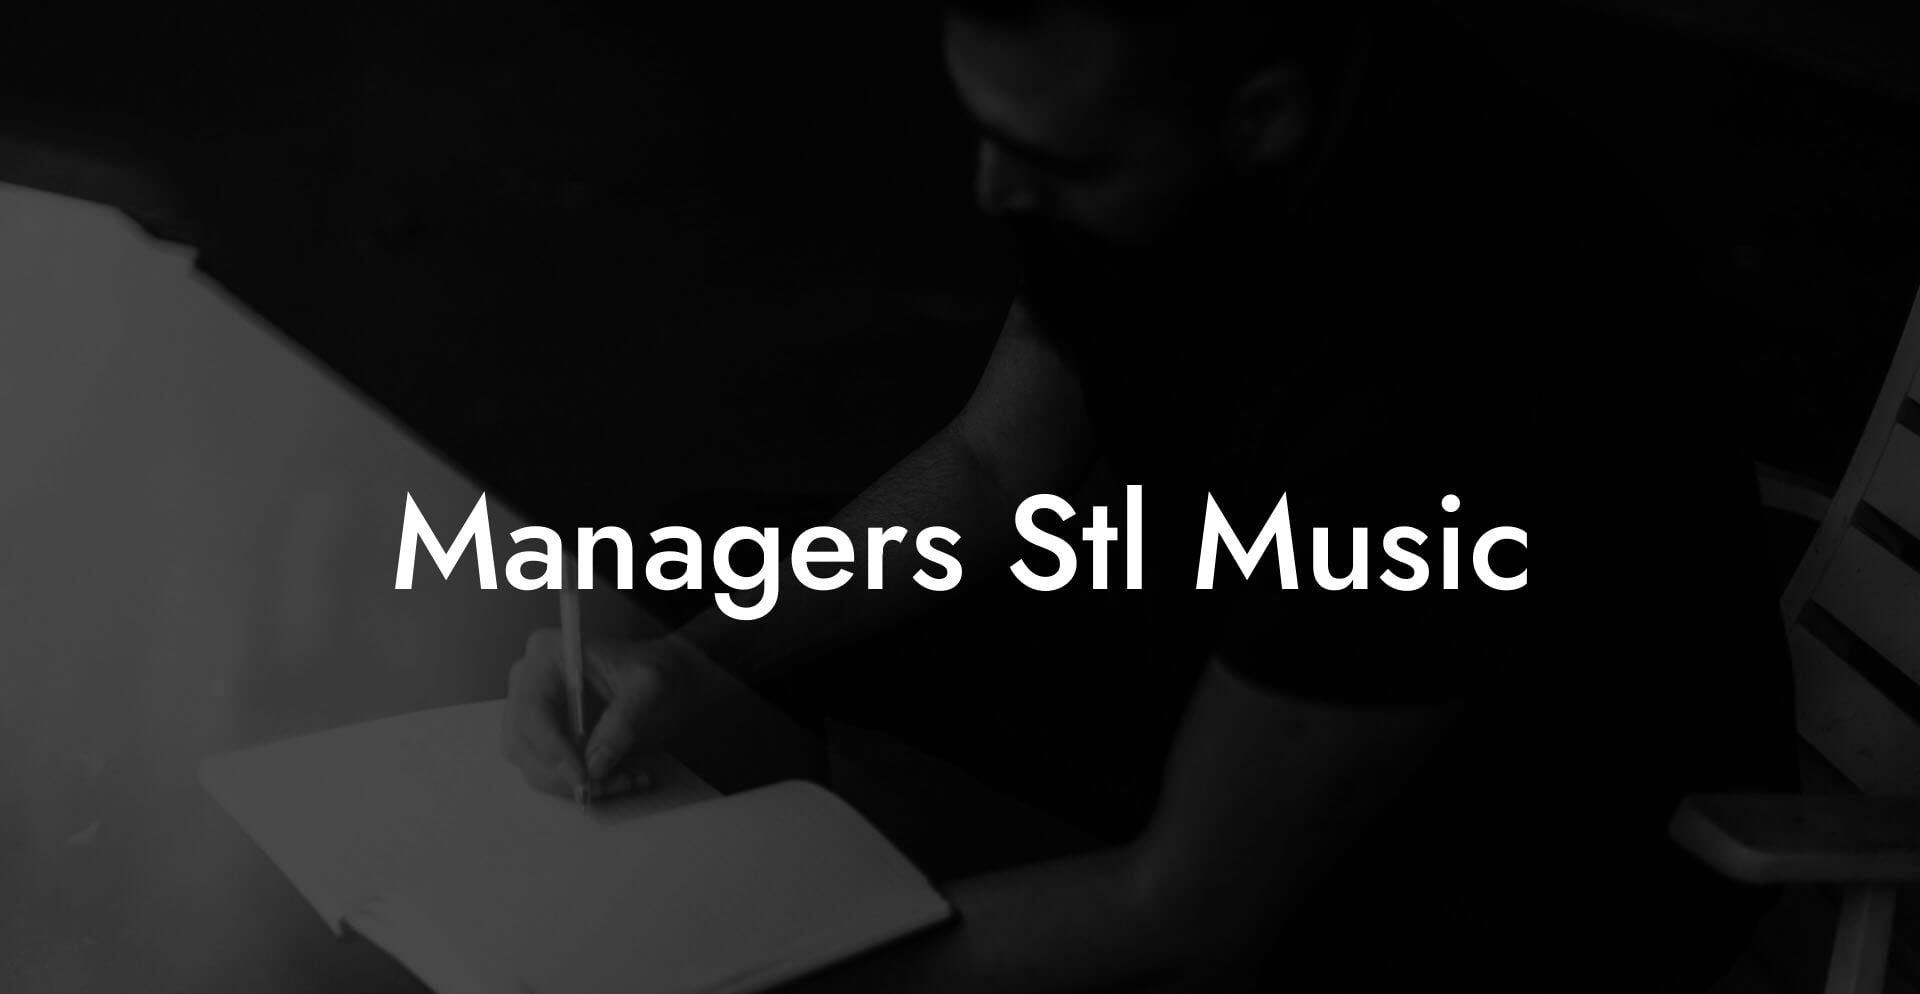 Managers Stl Music